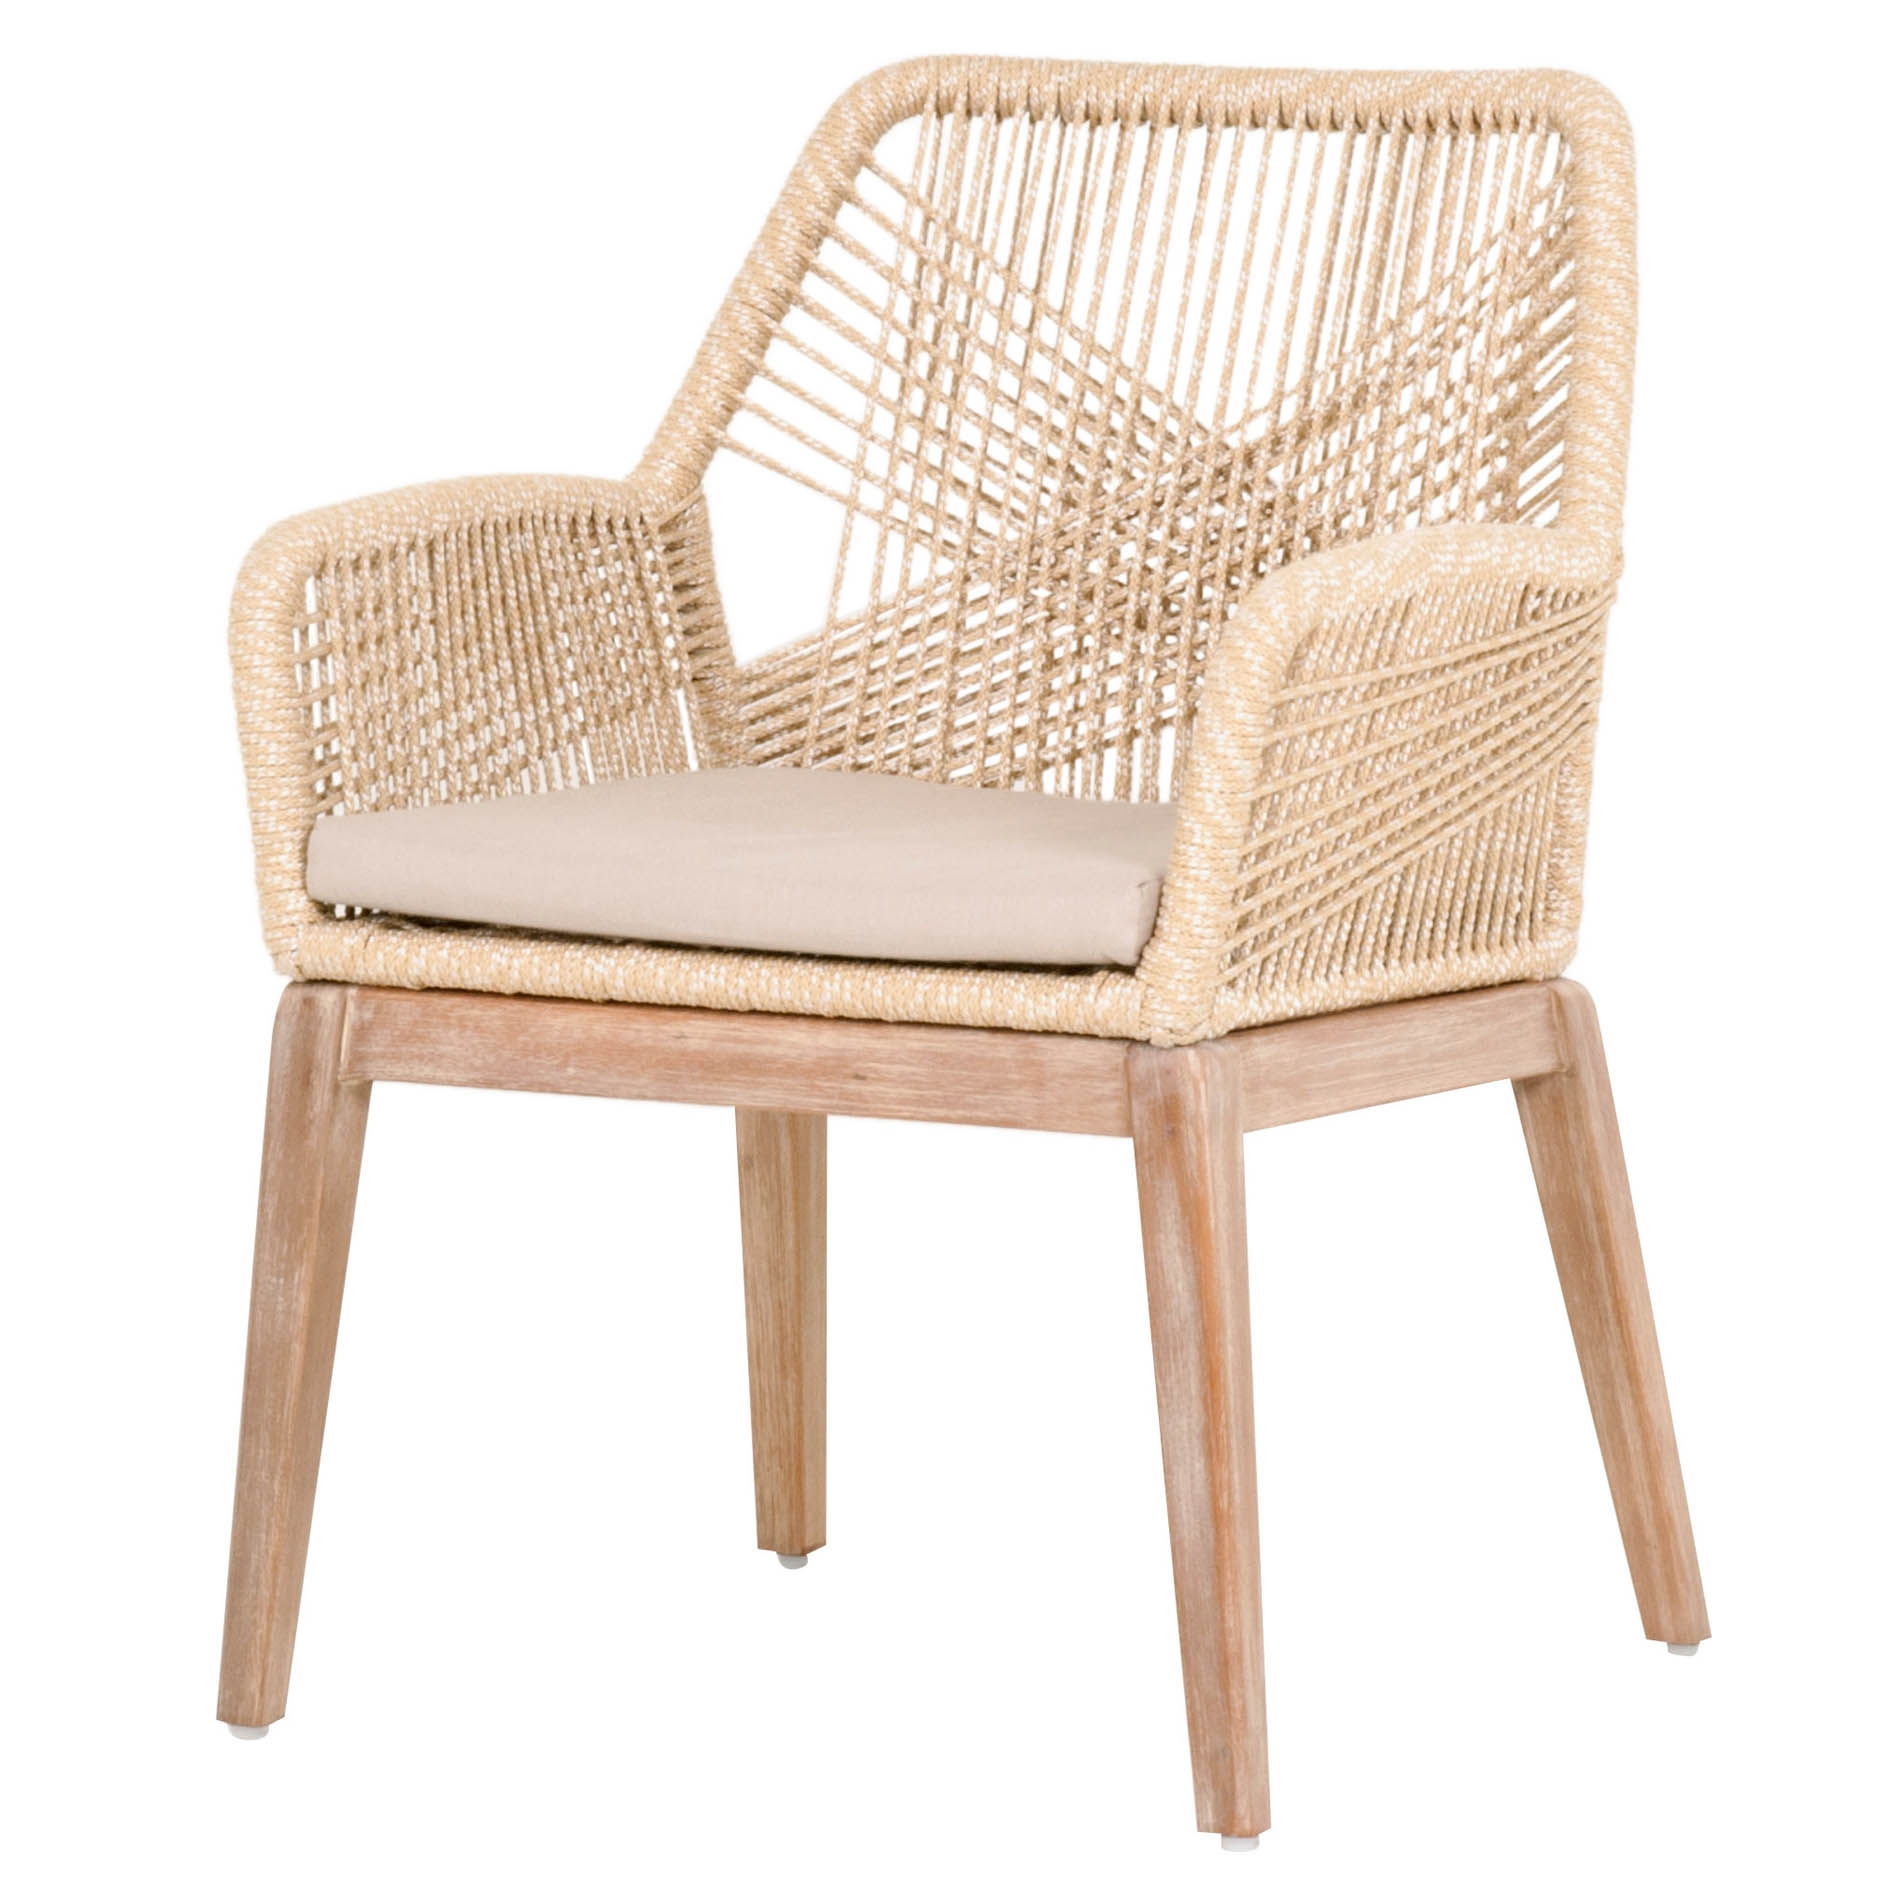 London Arm Chair, Sand (Set of 2) - Image 1